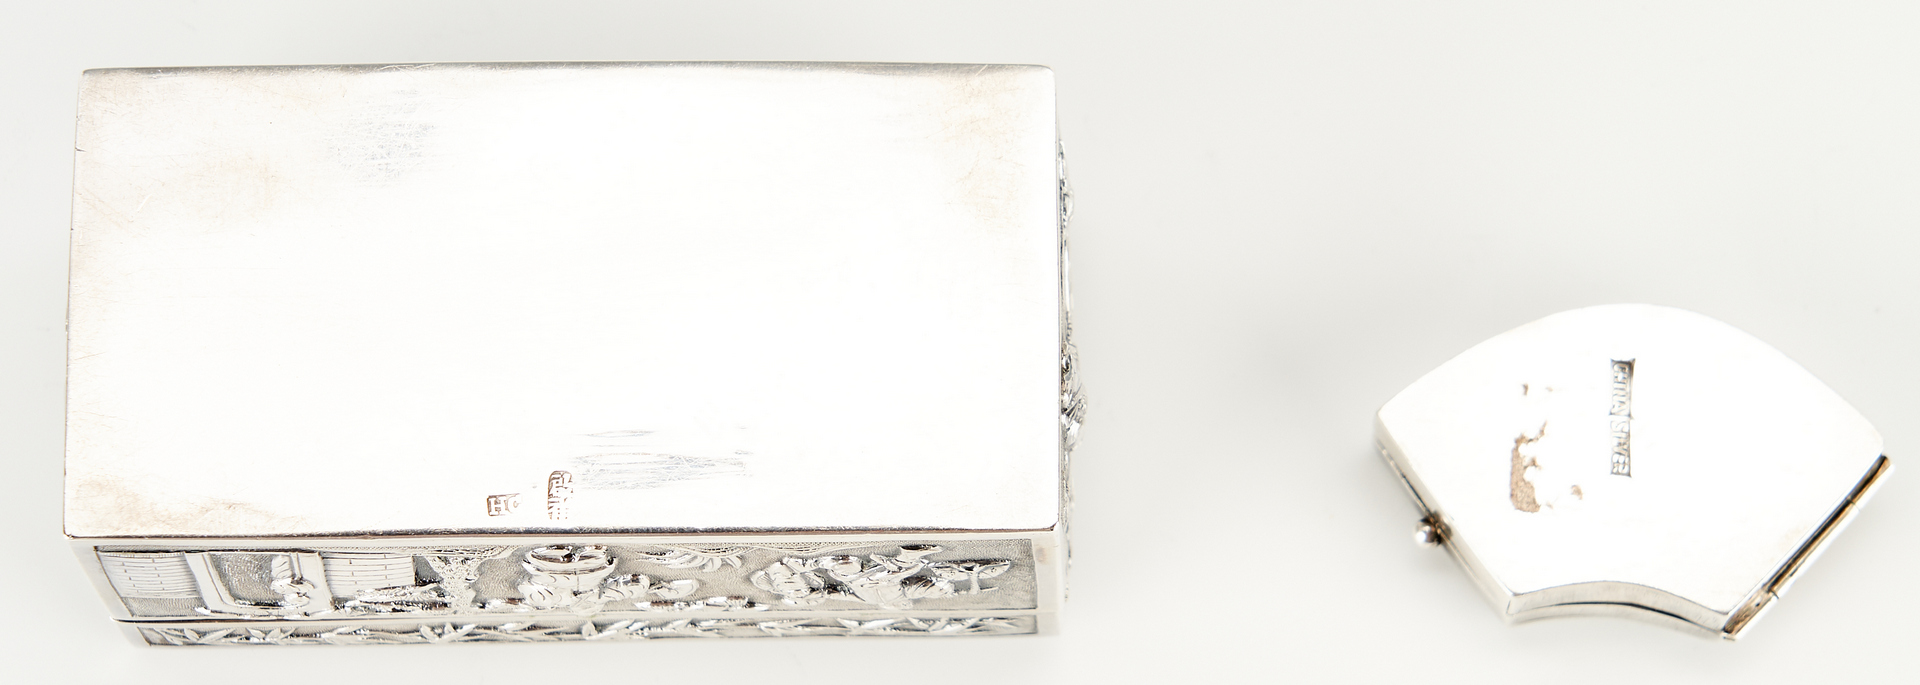 Lot 7: 2 Chinese Silver Snuff Boxes